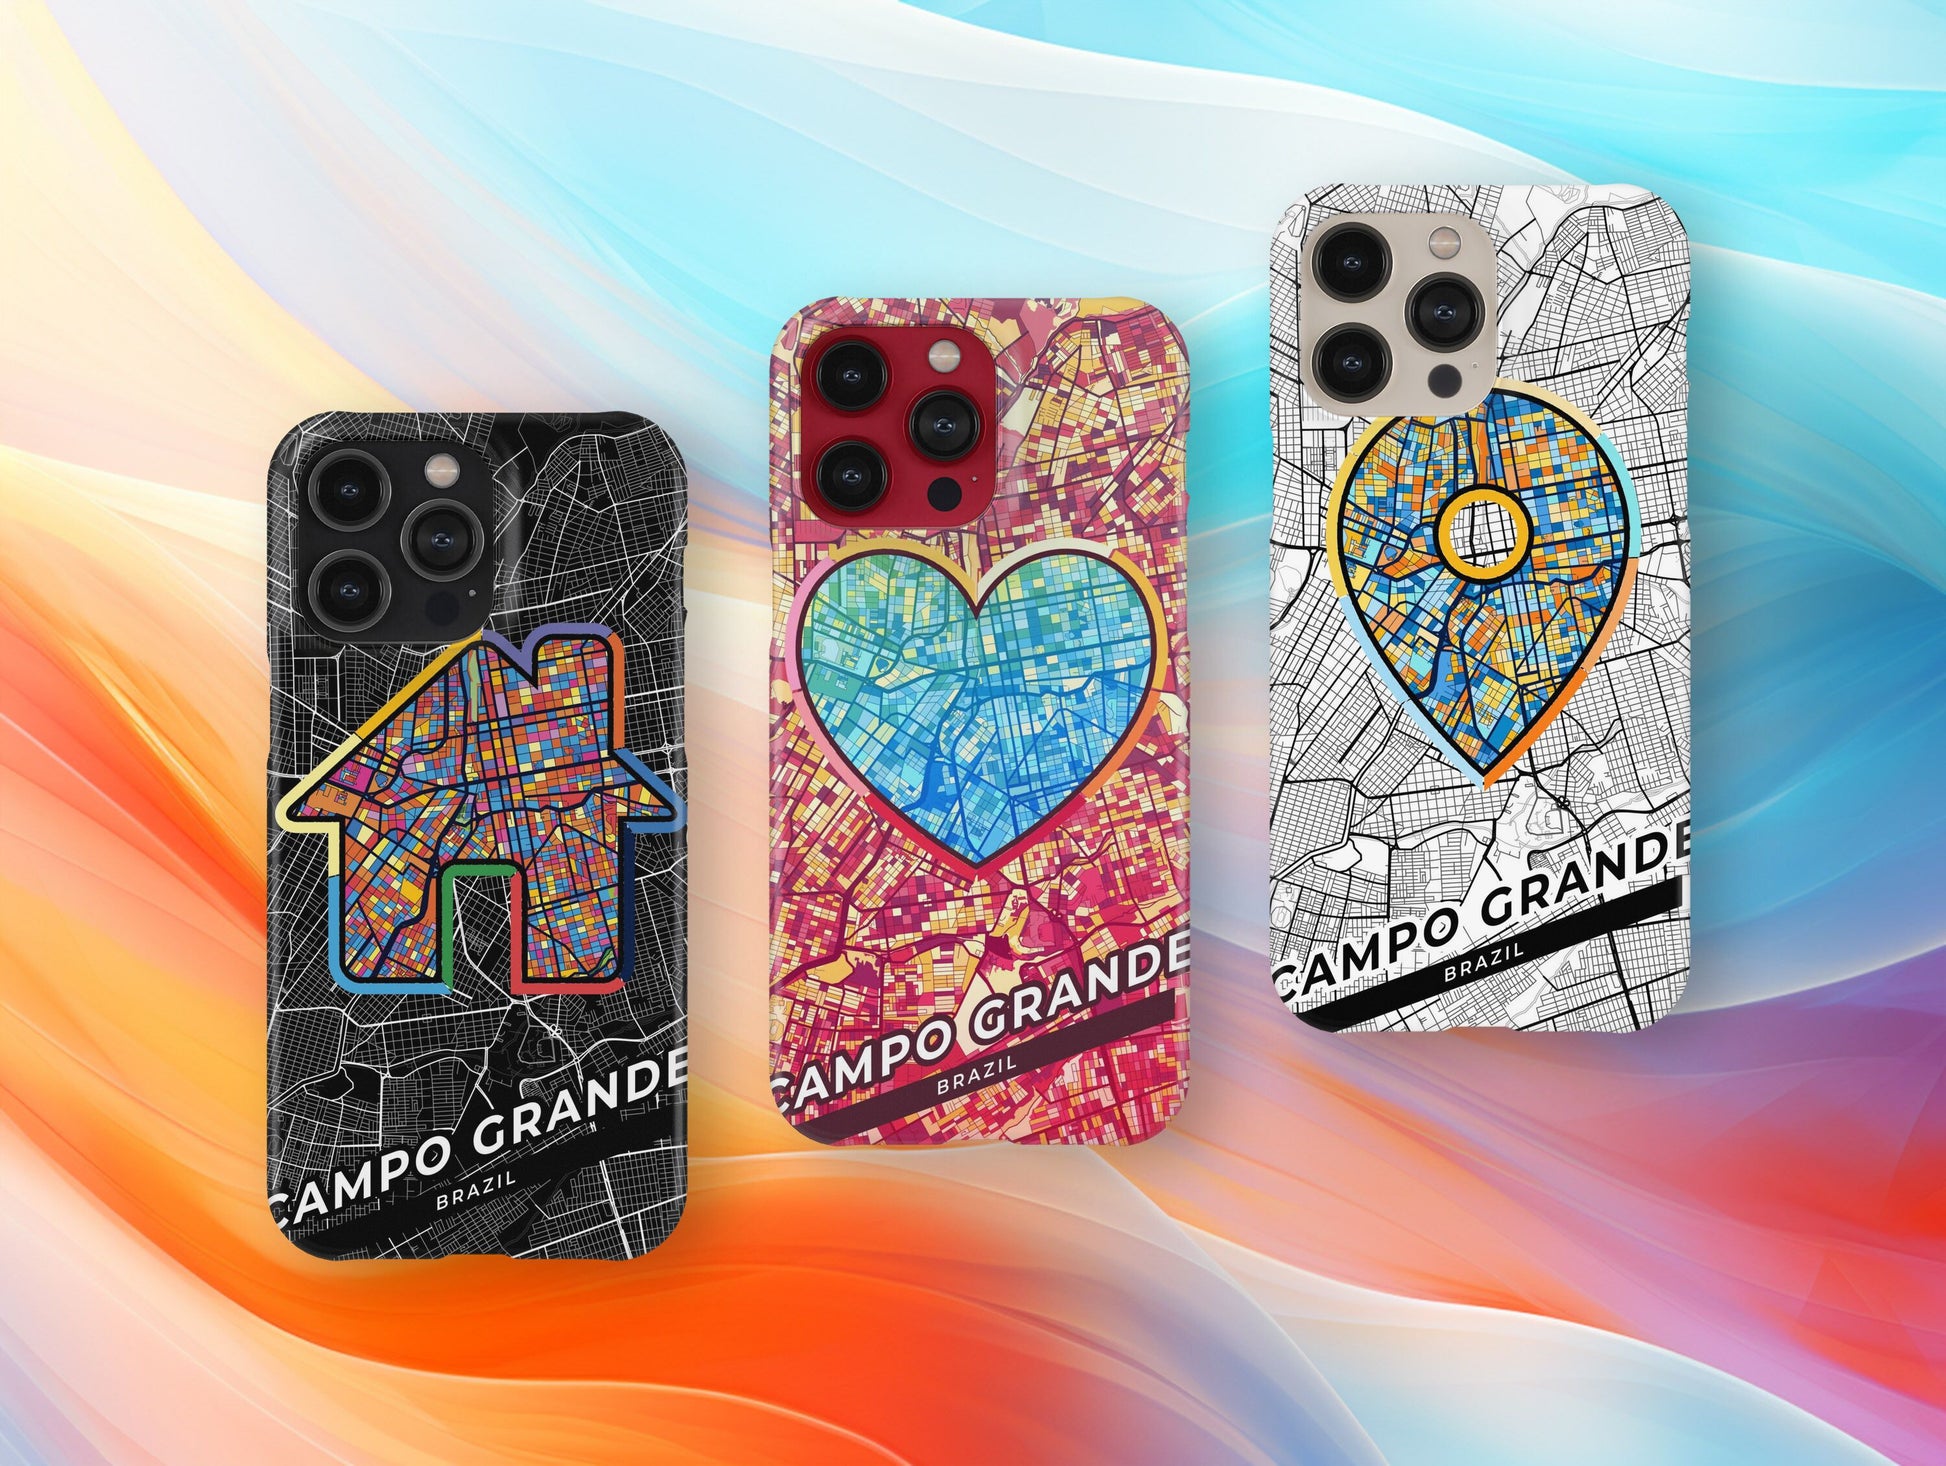 Campo Grande Brazil slim phone case with colorful icon. Birthday, wedding or housewarming gift. Couple match cases.